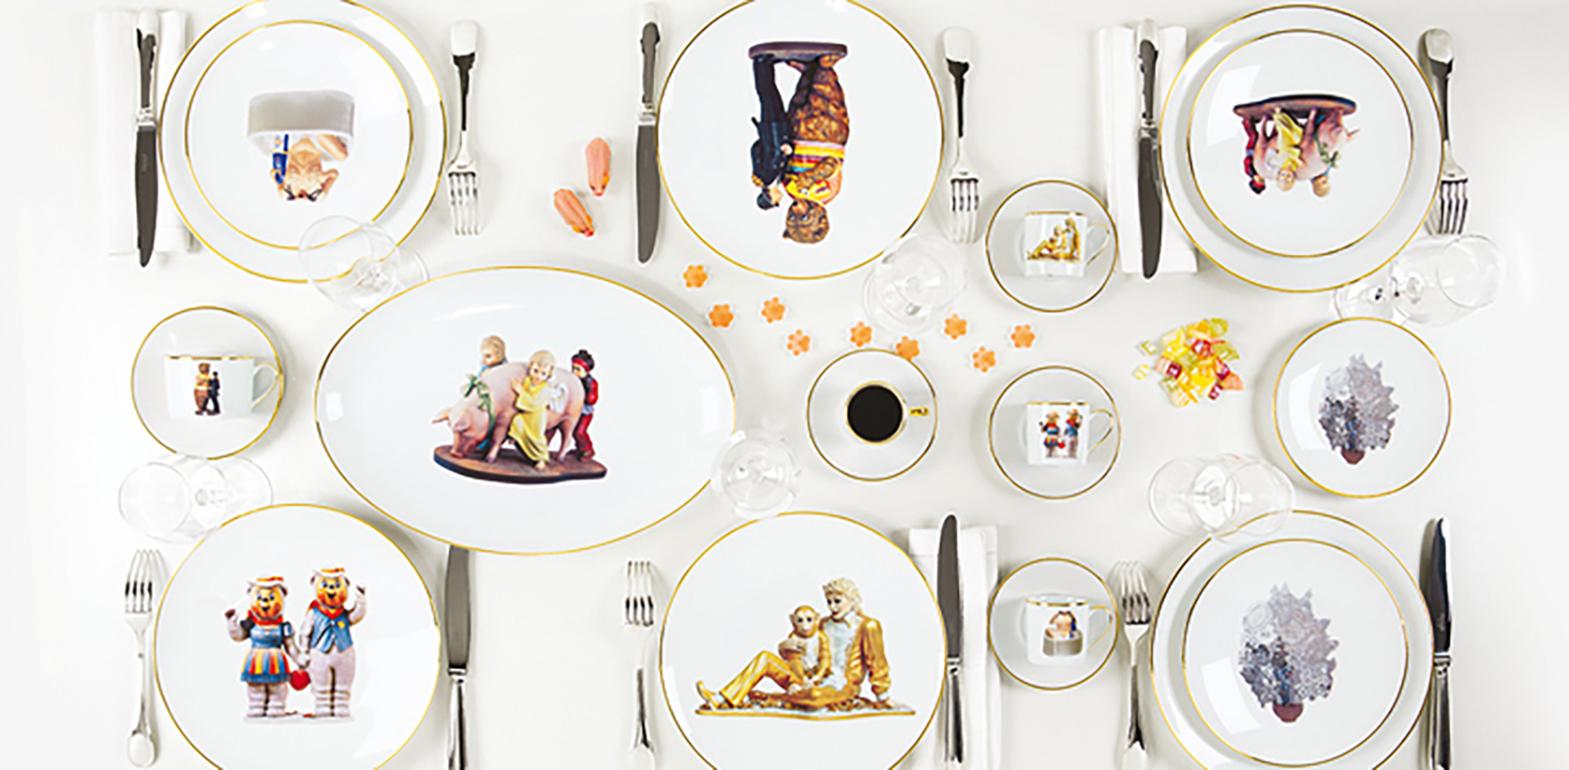 To celebrate Bernardaud's 150th anniversary, Jeff Koons made a series of beautiful, limited edition porcelain objects with the famed porcelain maker in Limoges, France. The collection includes a vase, a serving platter, decorative plates, dinner